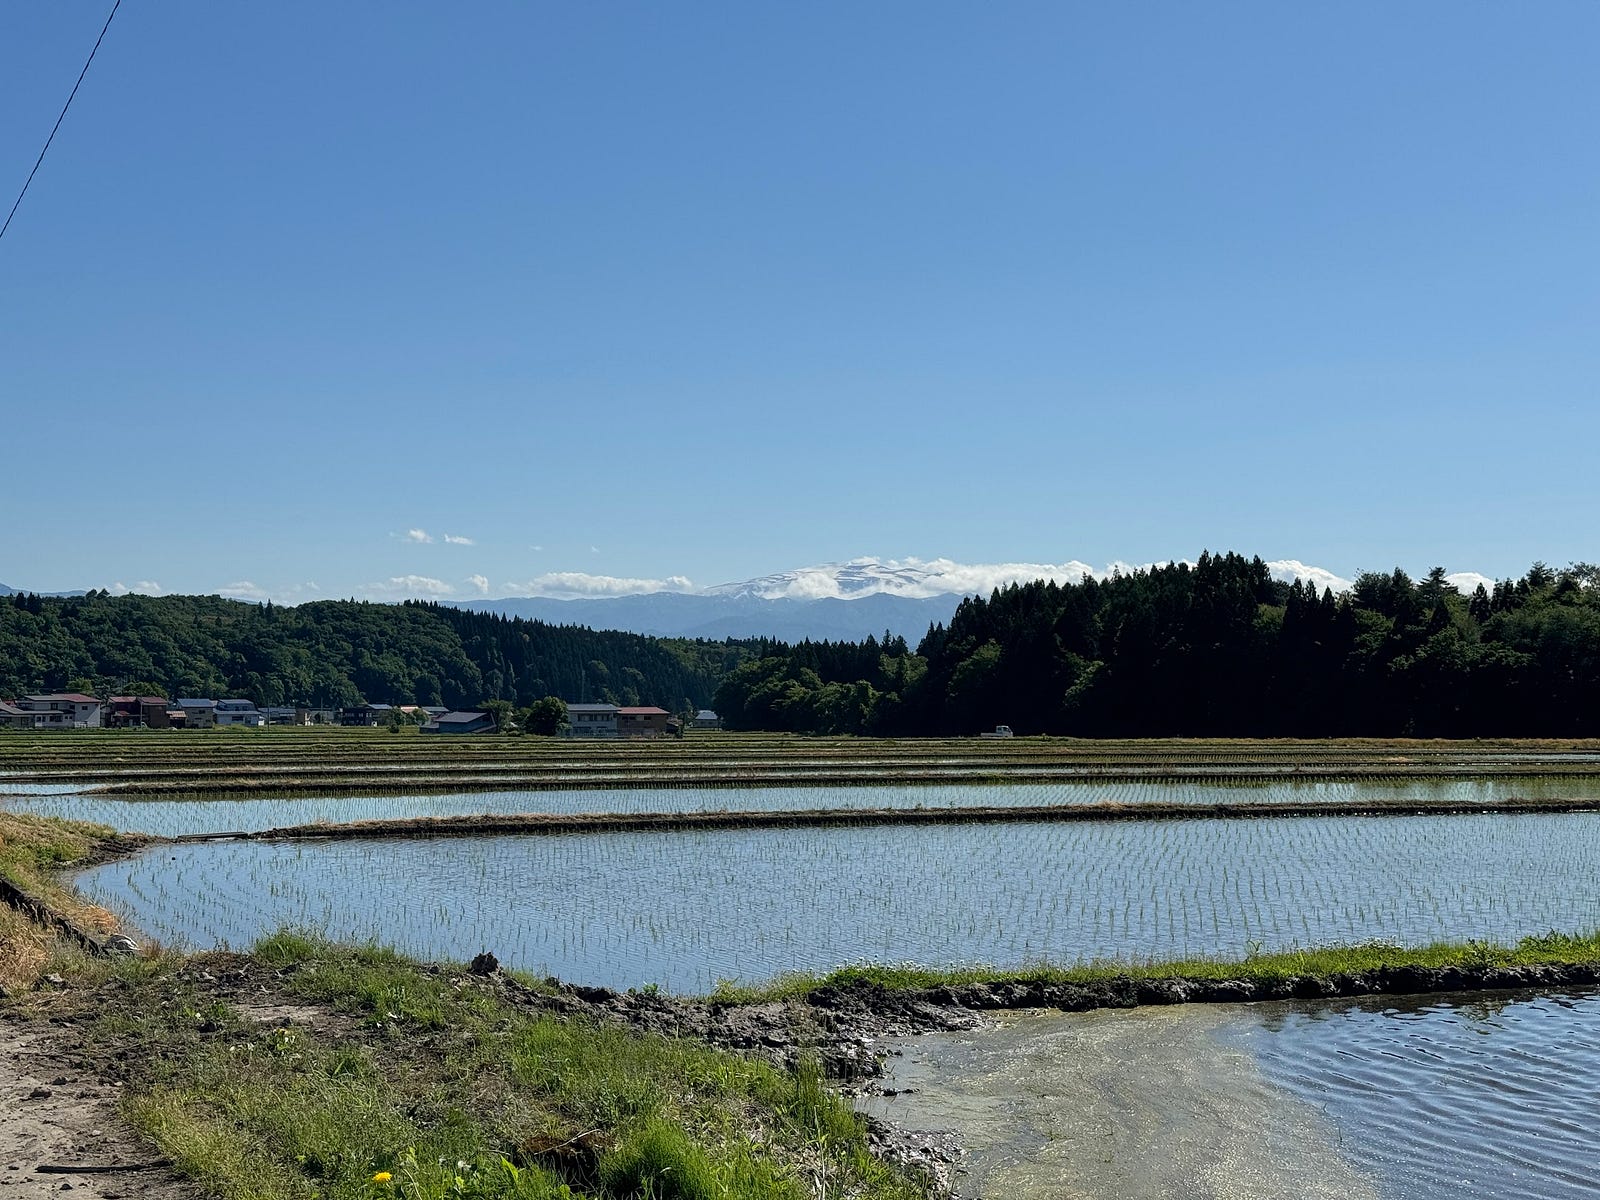 Mt. Gassan seen under a bright blue sky partially reflected in the rice fields of Shinjo City.